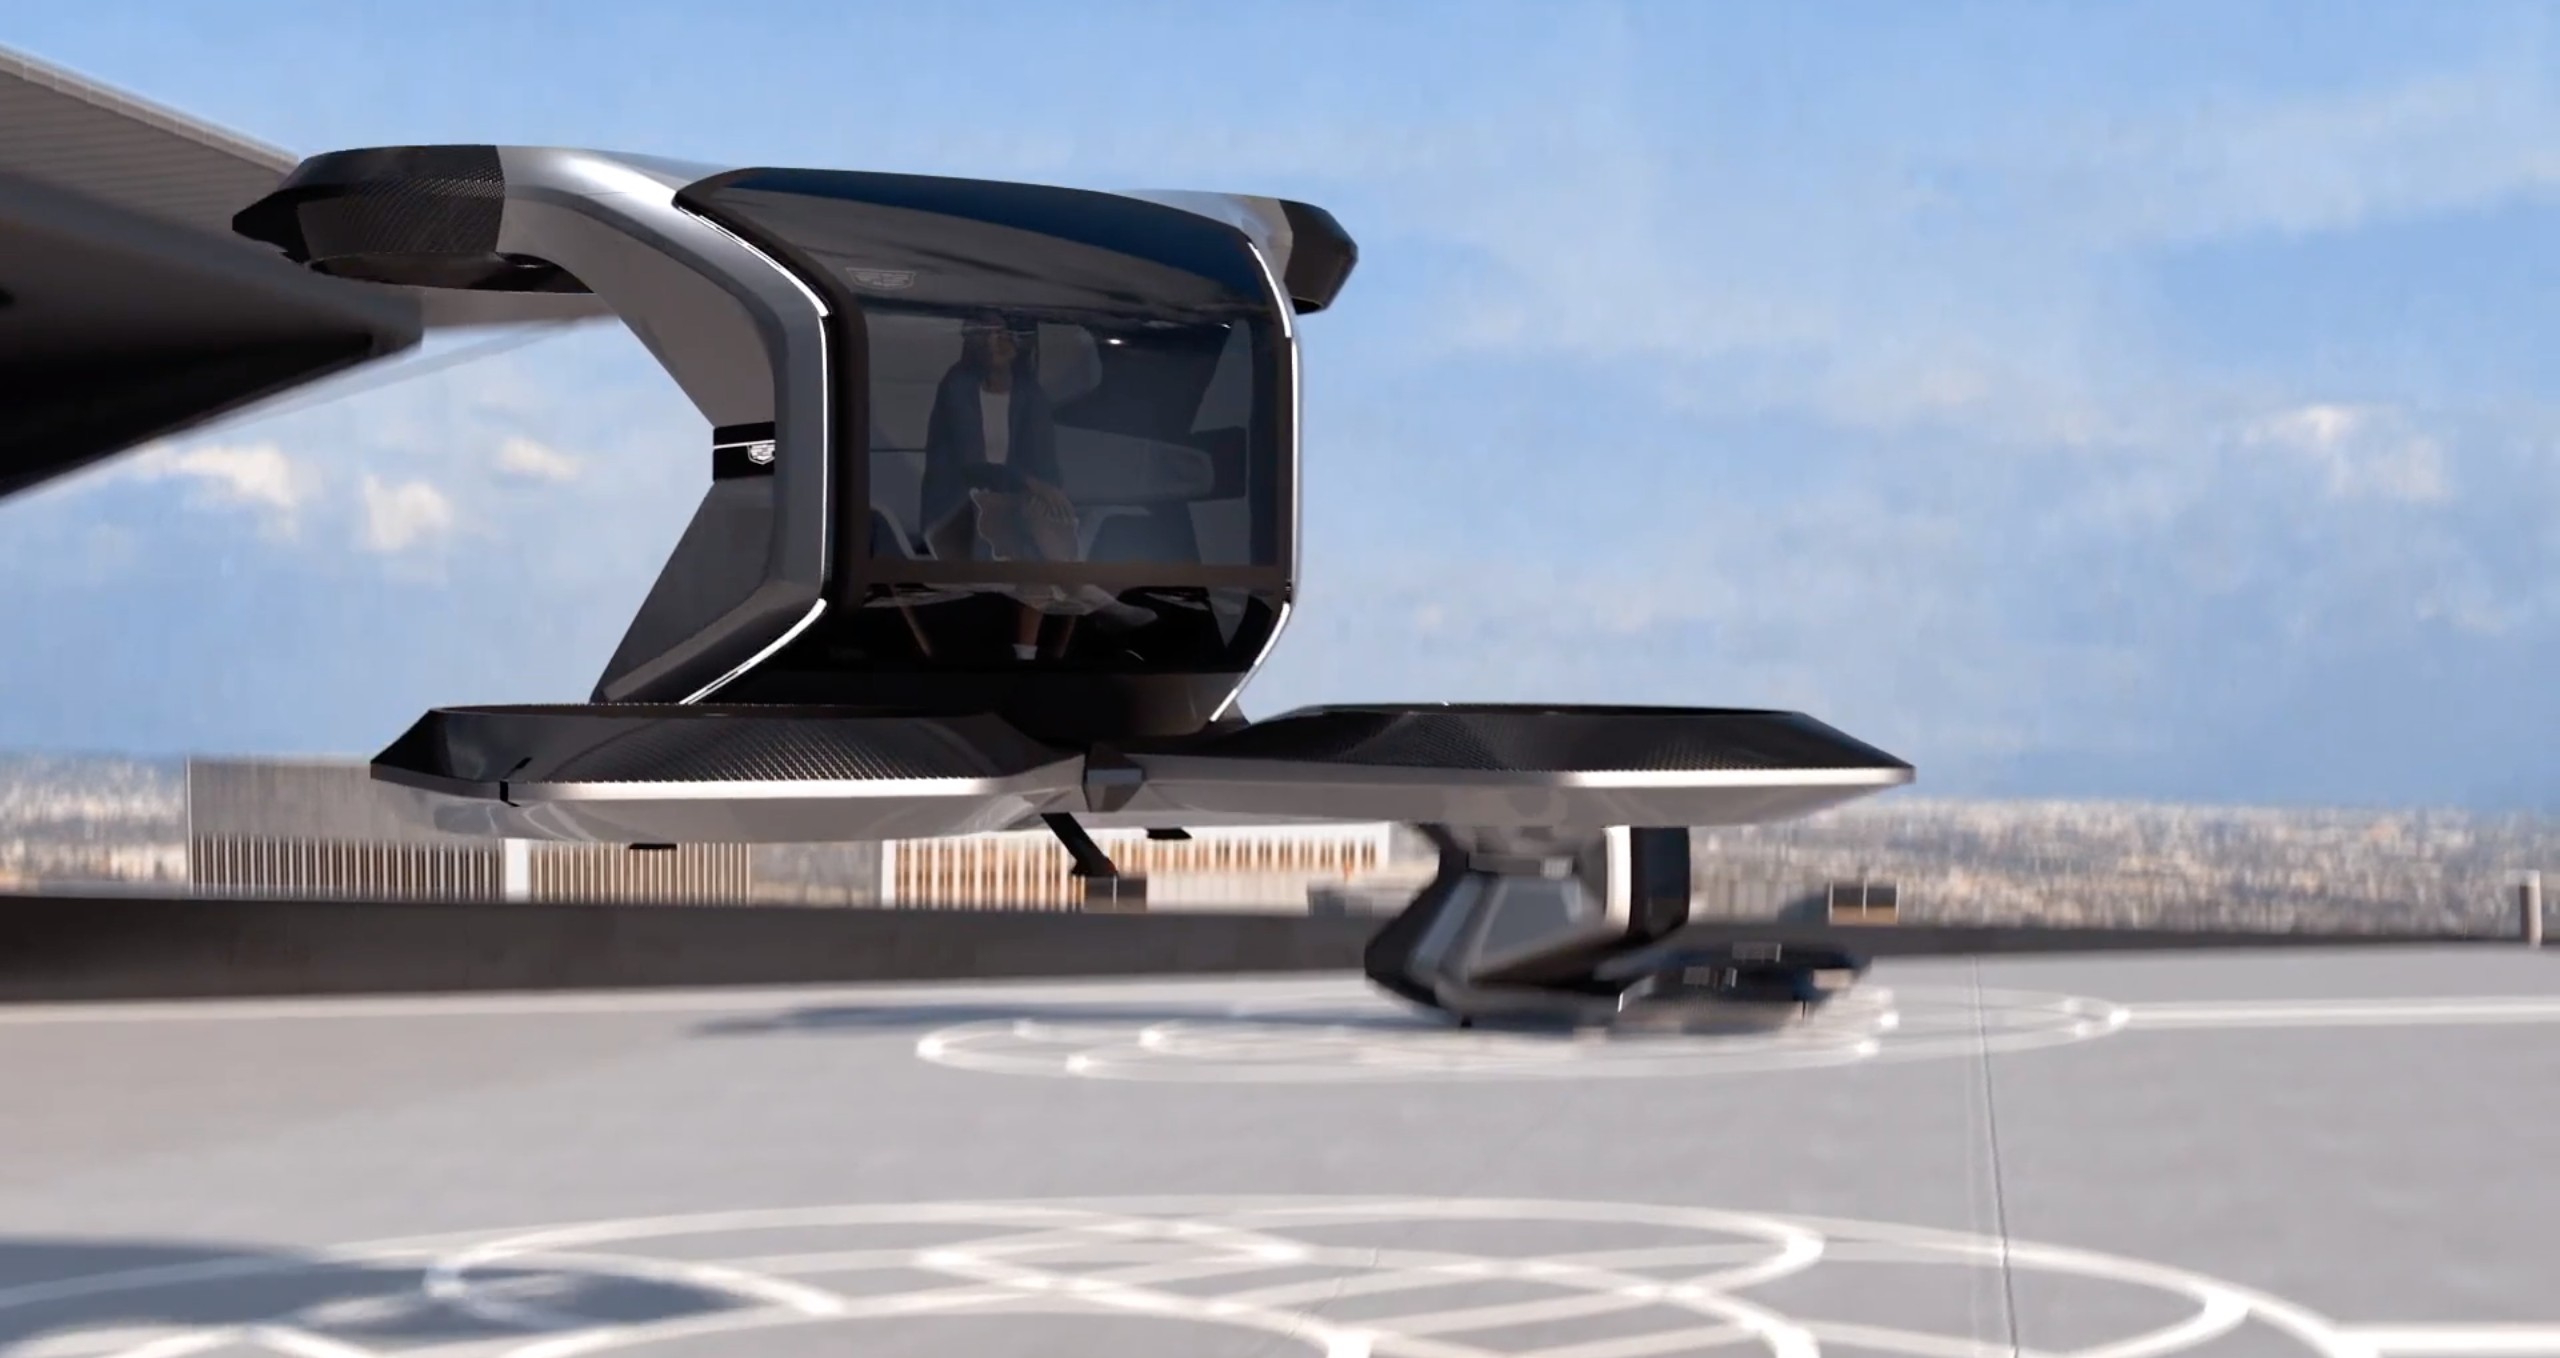 General Motors unveils its Cadillac flying car projects (Image: Production/YouTube)